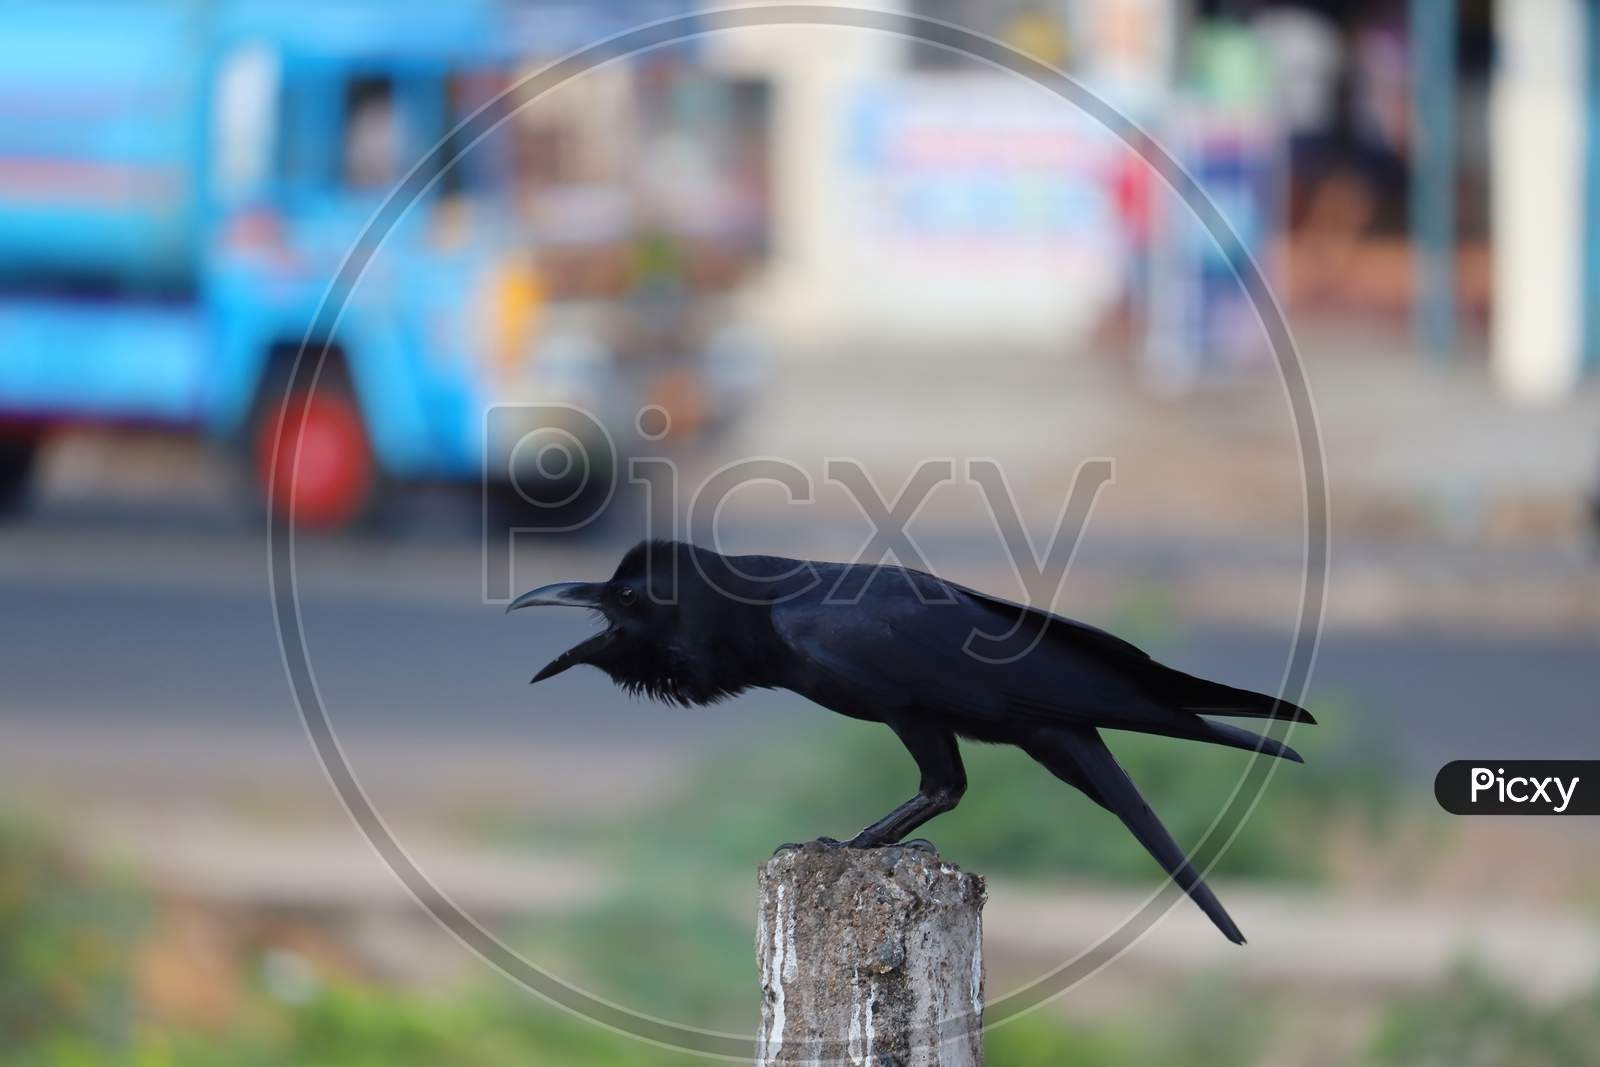 side view of carrion or Indian jungle crow ( himalayas corvus), bird background